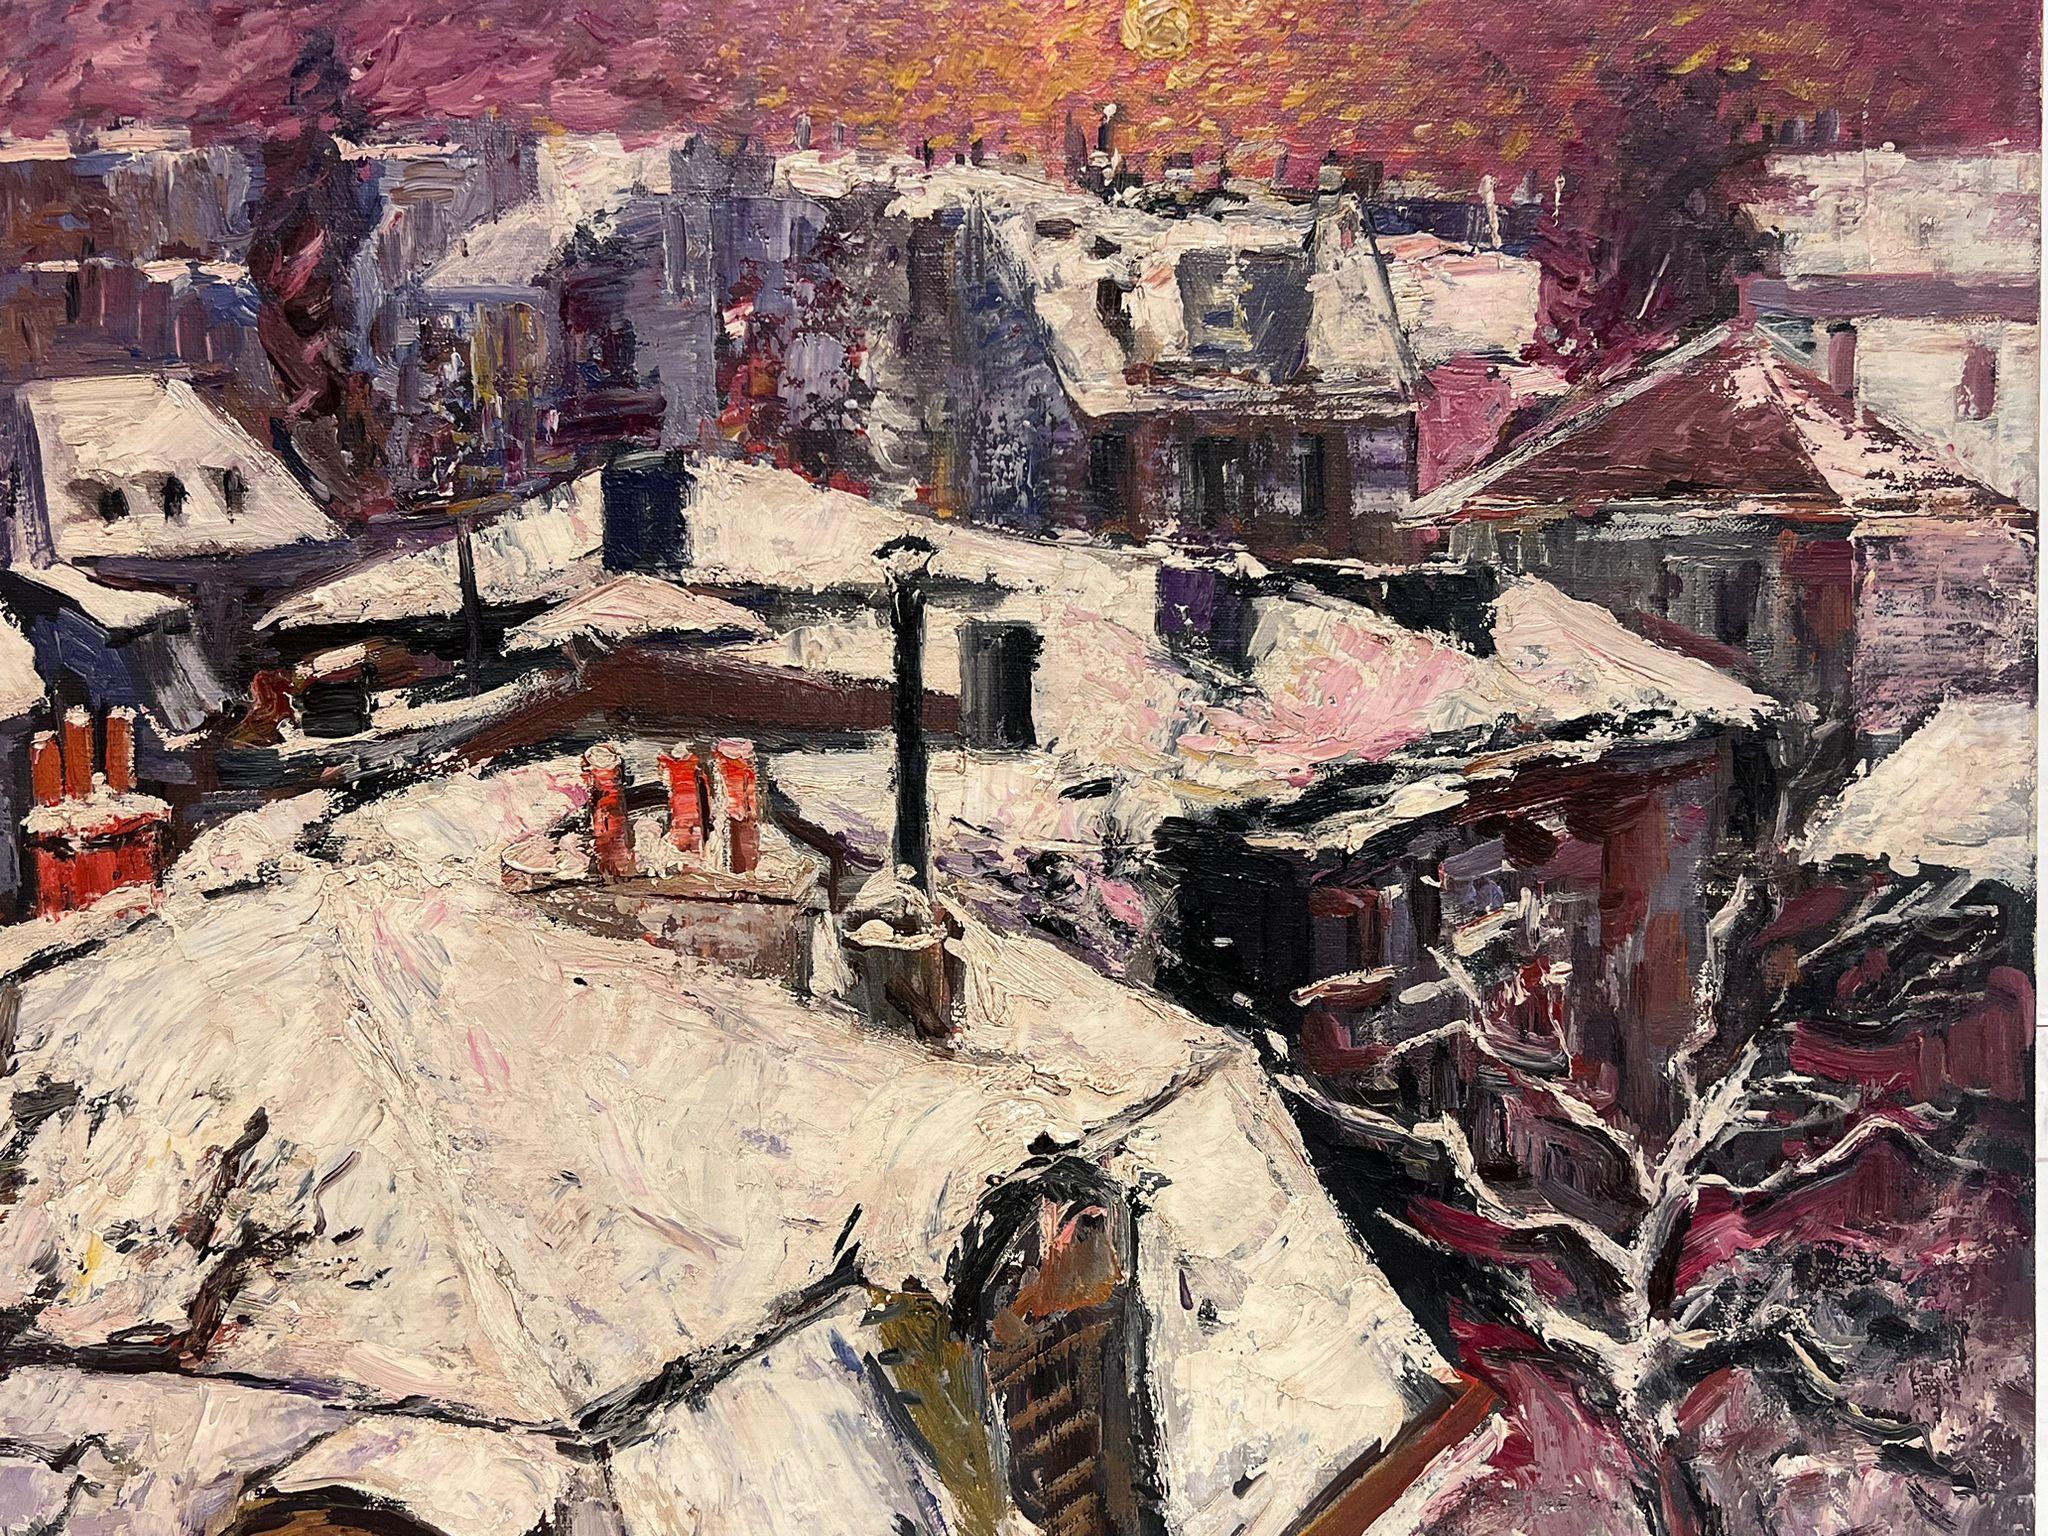 Winter Roof Tops
by Paul Flaubert (1928-1994)
signed oil on canvas, unframed
canvas: 18 x 22 inches
provenance: private collection, France
condition: very good and sound condition 

Born in 1928, Paul FLAUBERT was a painter passionate about animated